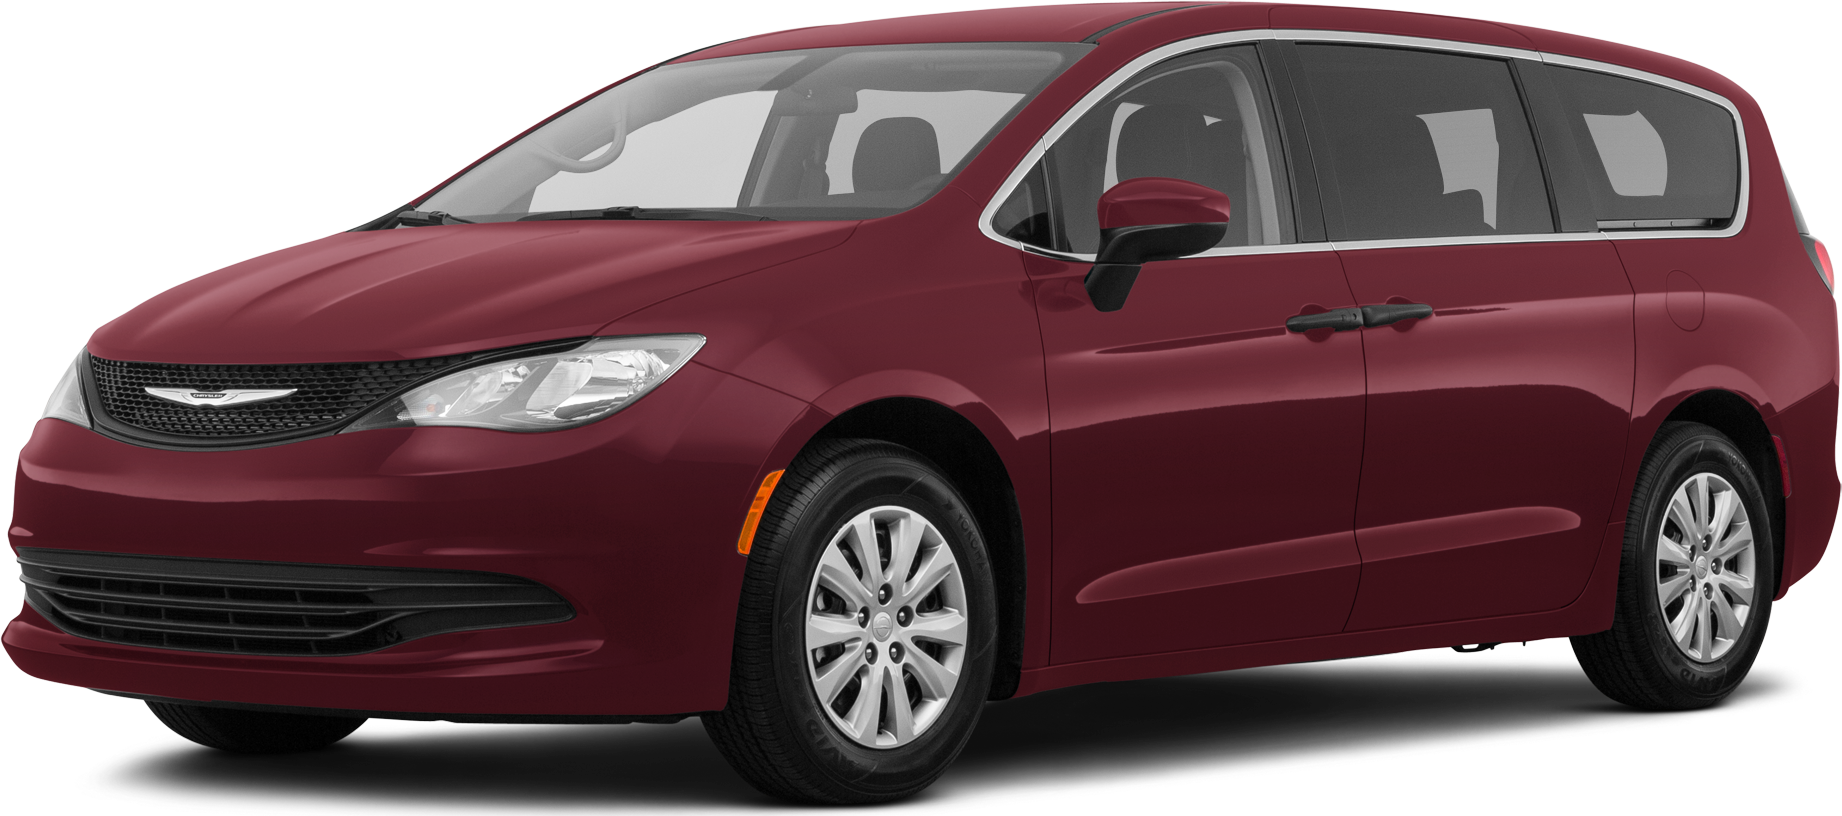 2020 chrysler voyager lxi review